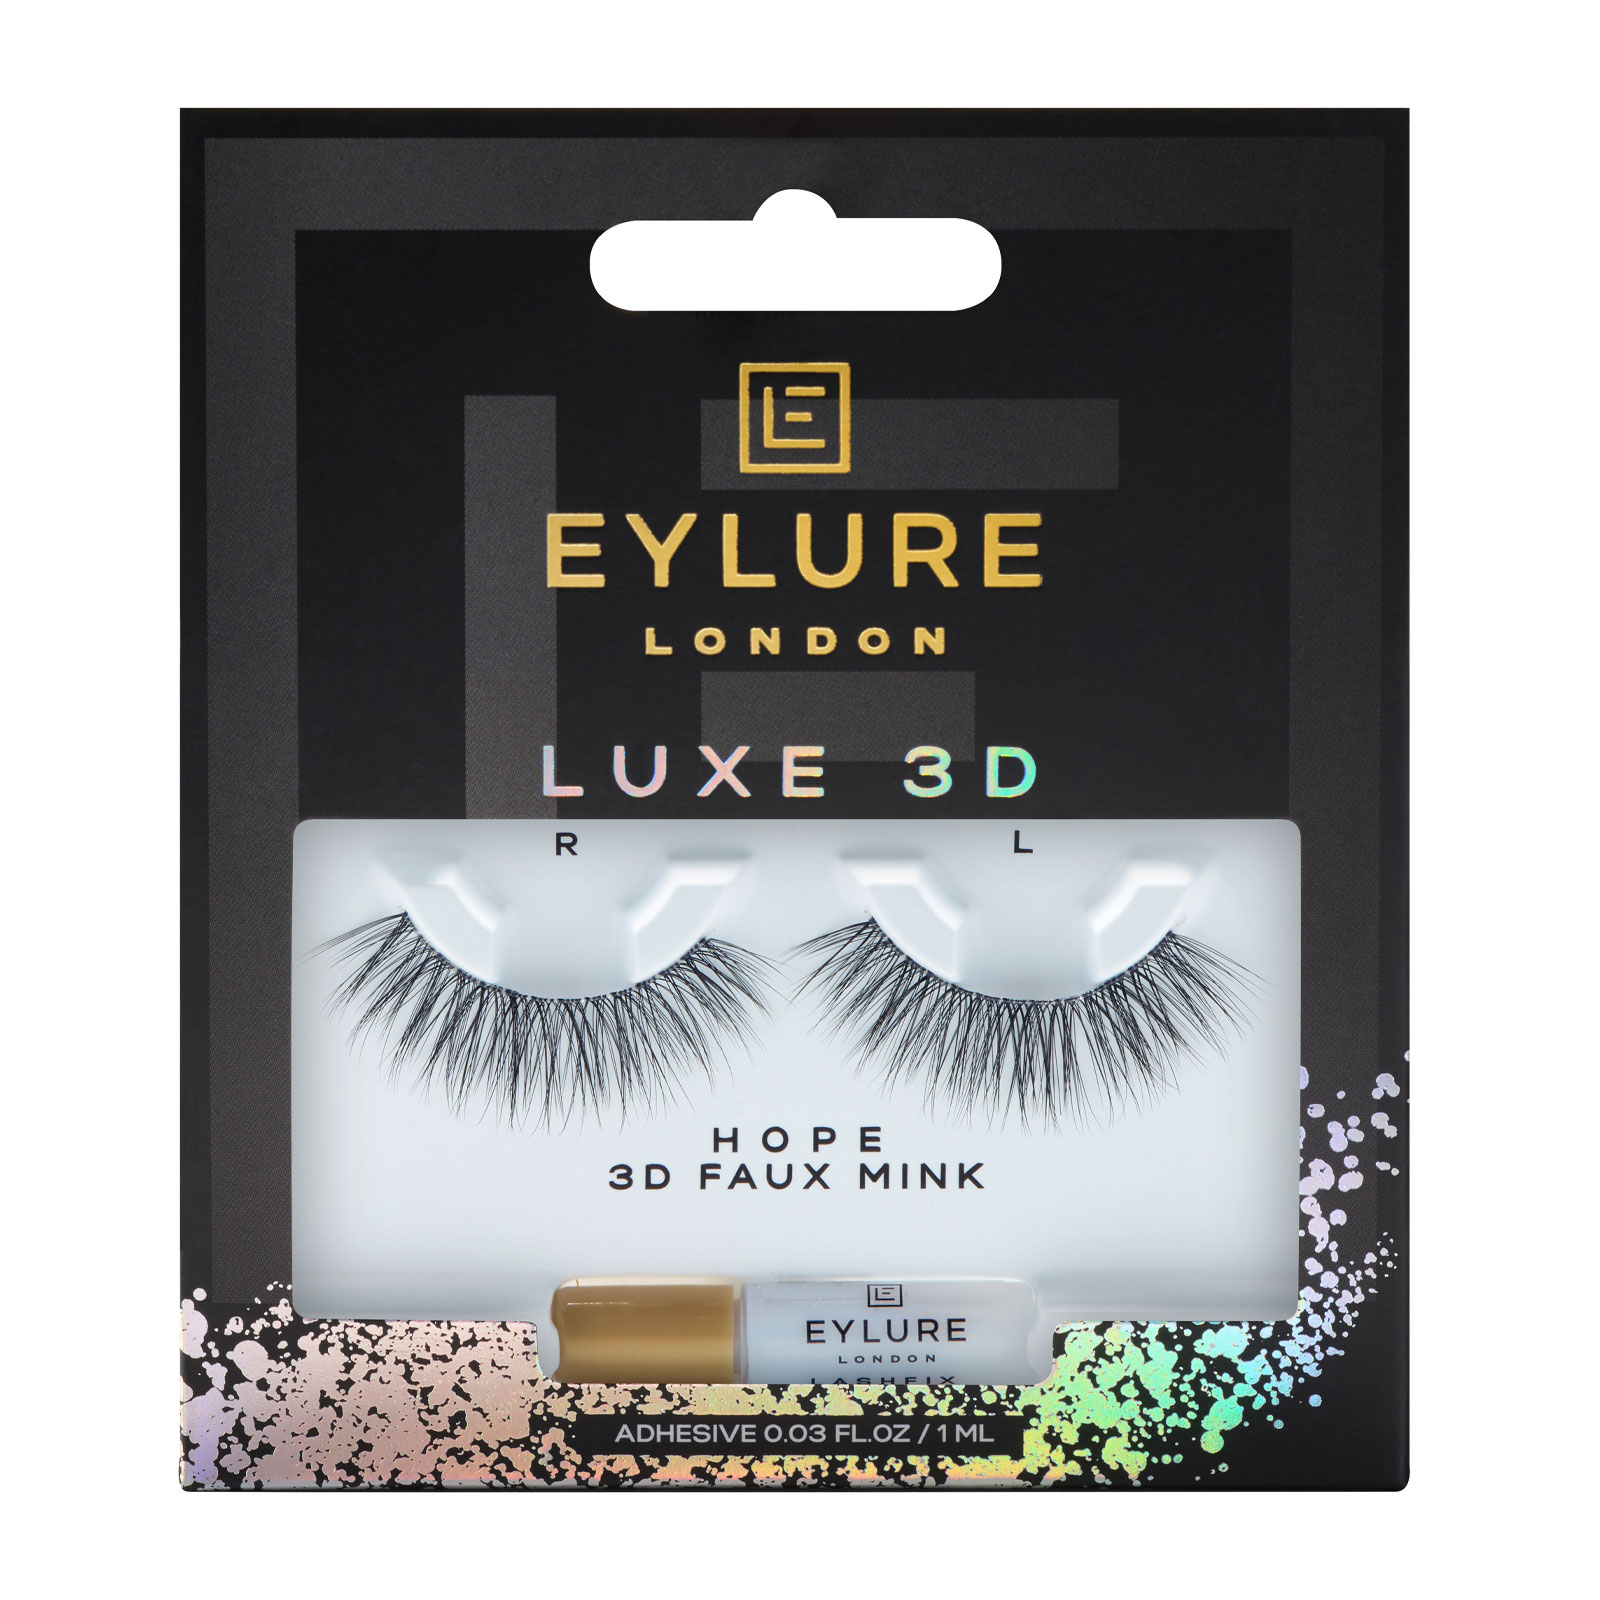 Eylure Luxe 3D 魅惑假睫毛 1对 Hope